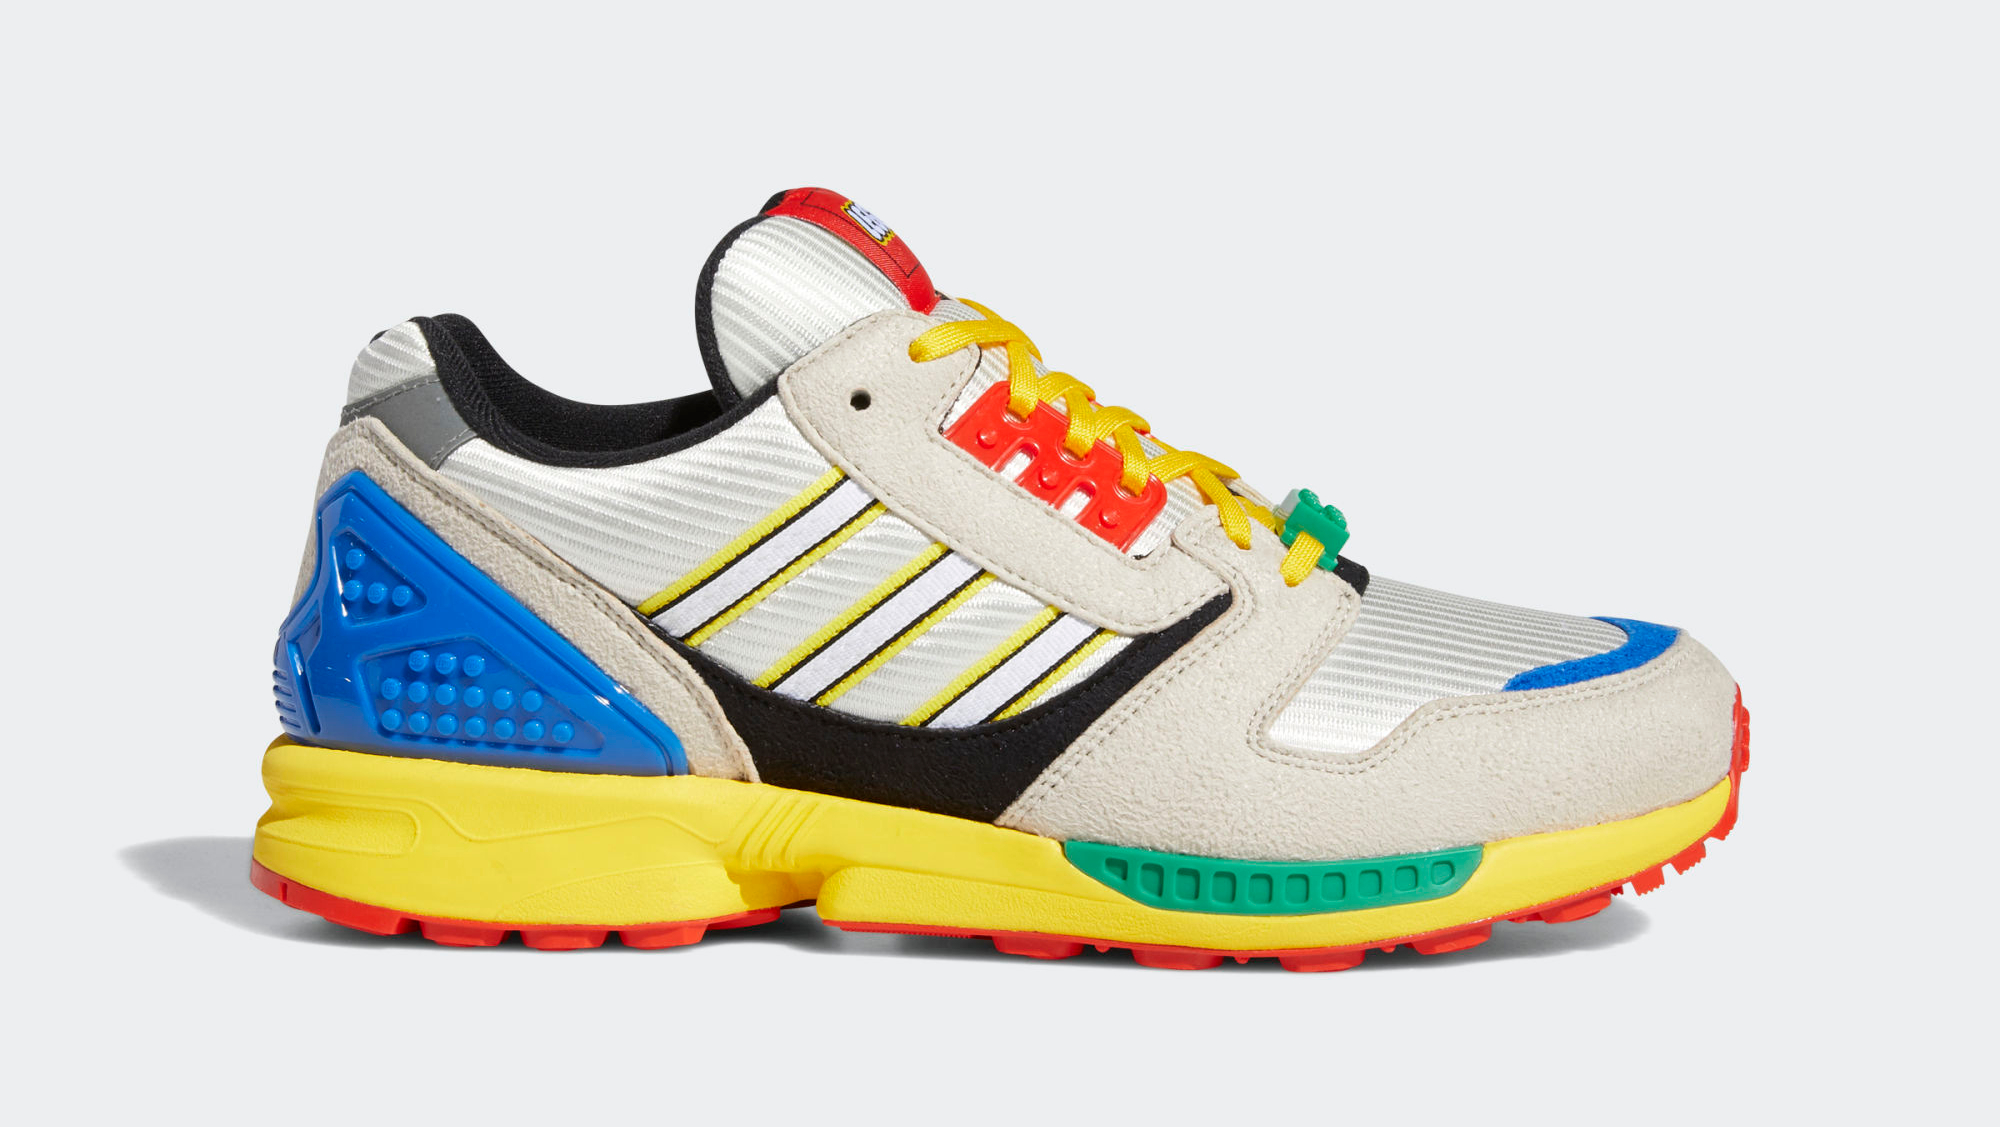 Adidas, Prices & Collaborations | ZX Series, Sneaker Calendar 